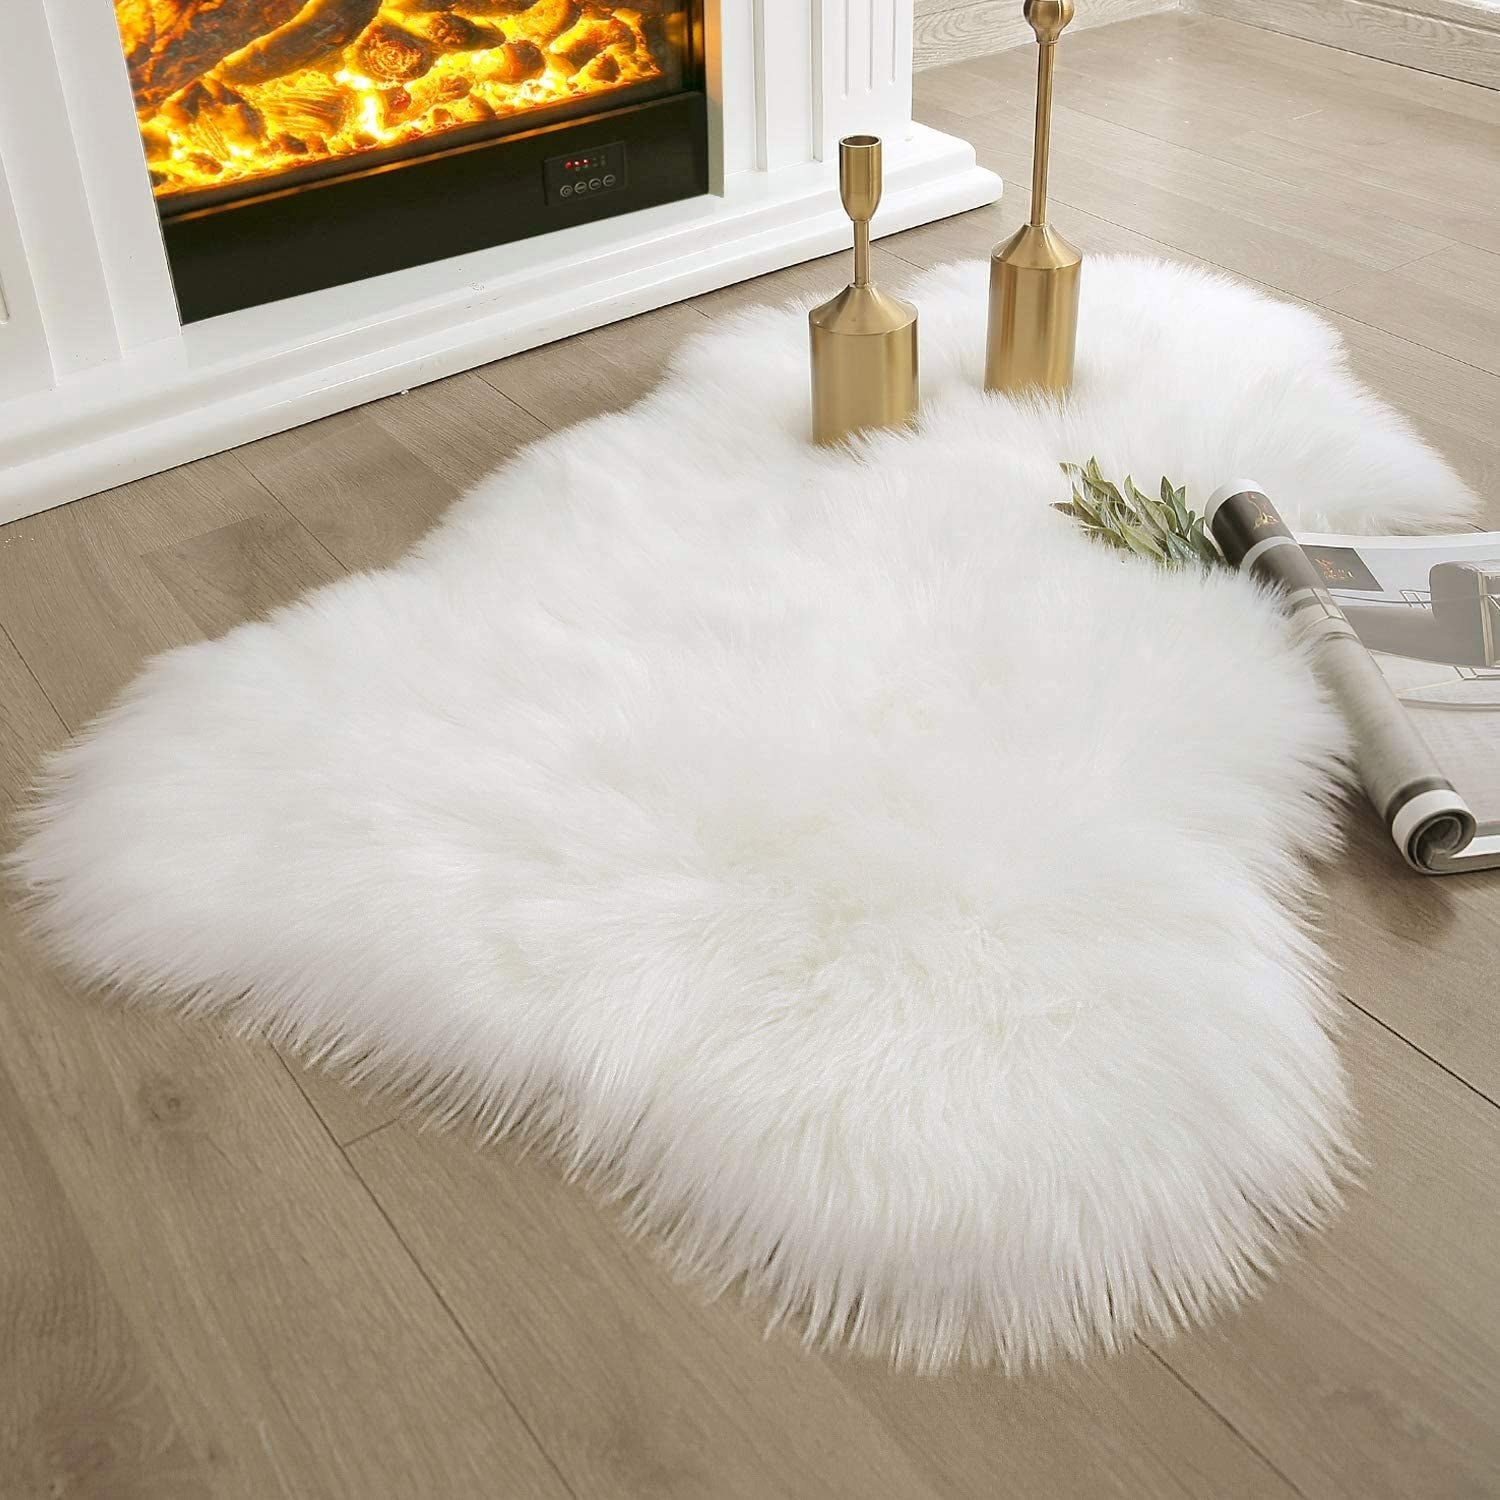 The rug in white on a floor